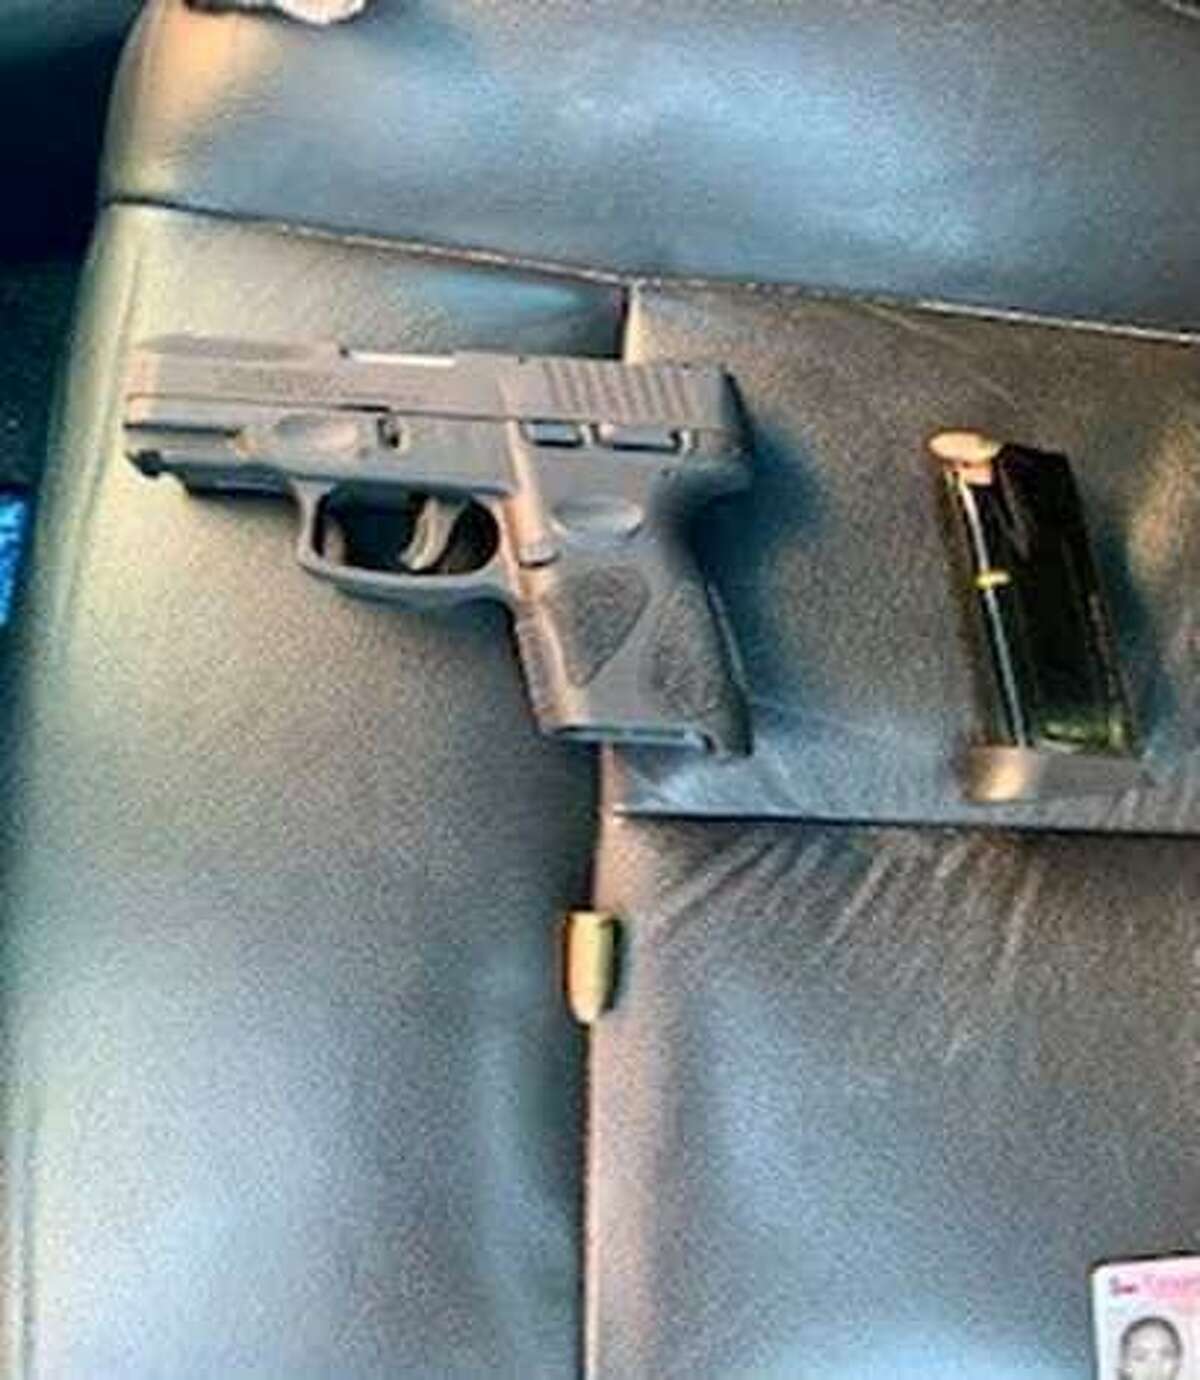 The Texas Department of Public Safety said they seized this gun from a high-ranking Mexican Mafia member following a traffic stop in Laredo.